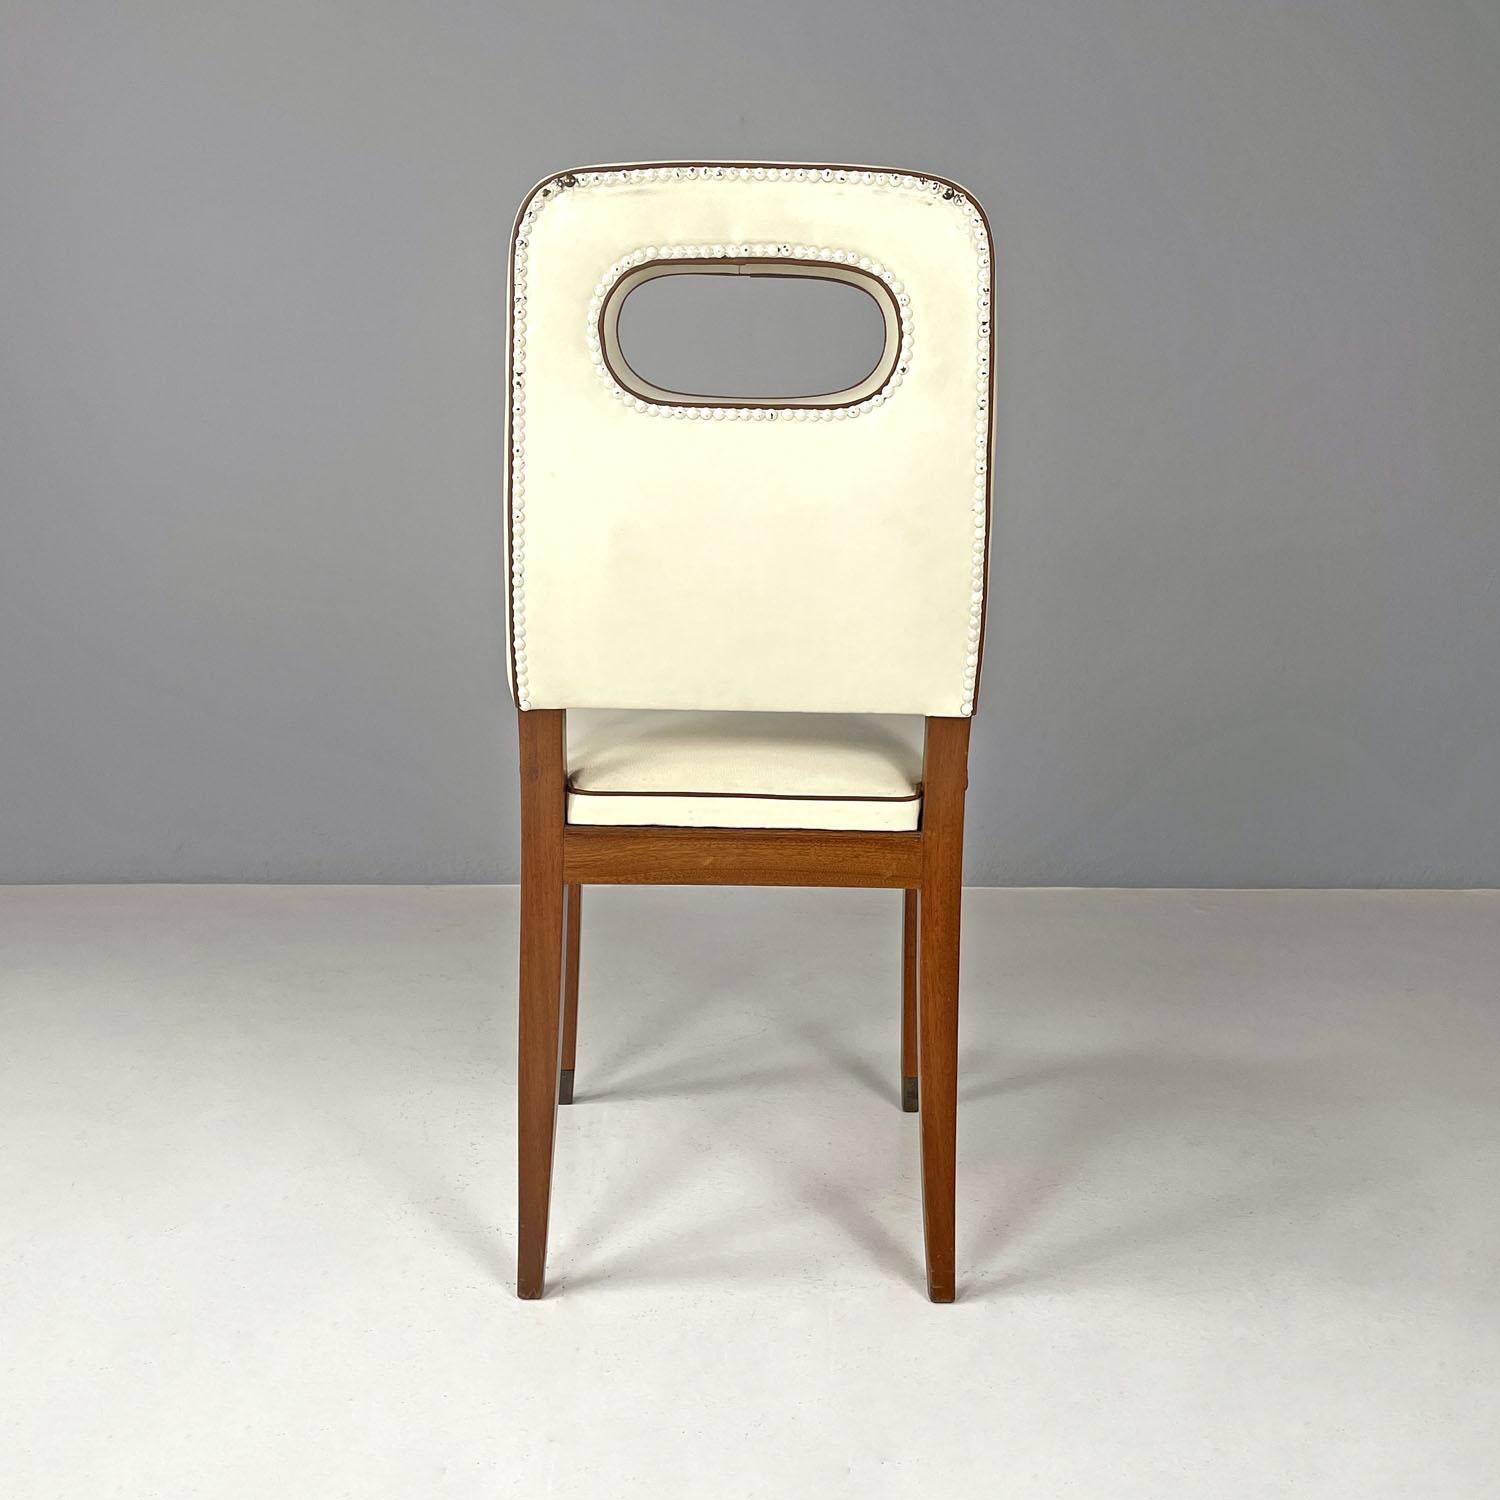 Brass Italian Art Deco white leather and wood chair by Giovanni Gariboldi, 1940s For Sale